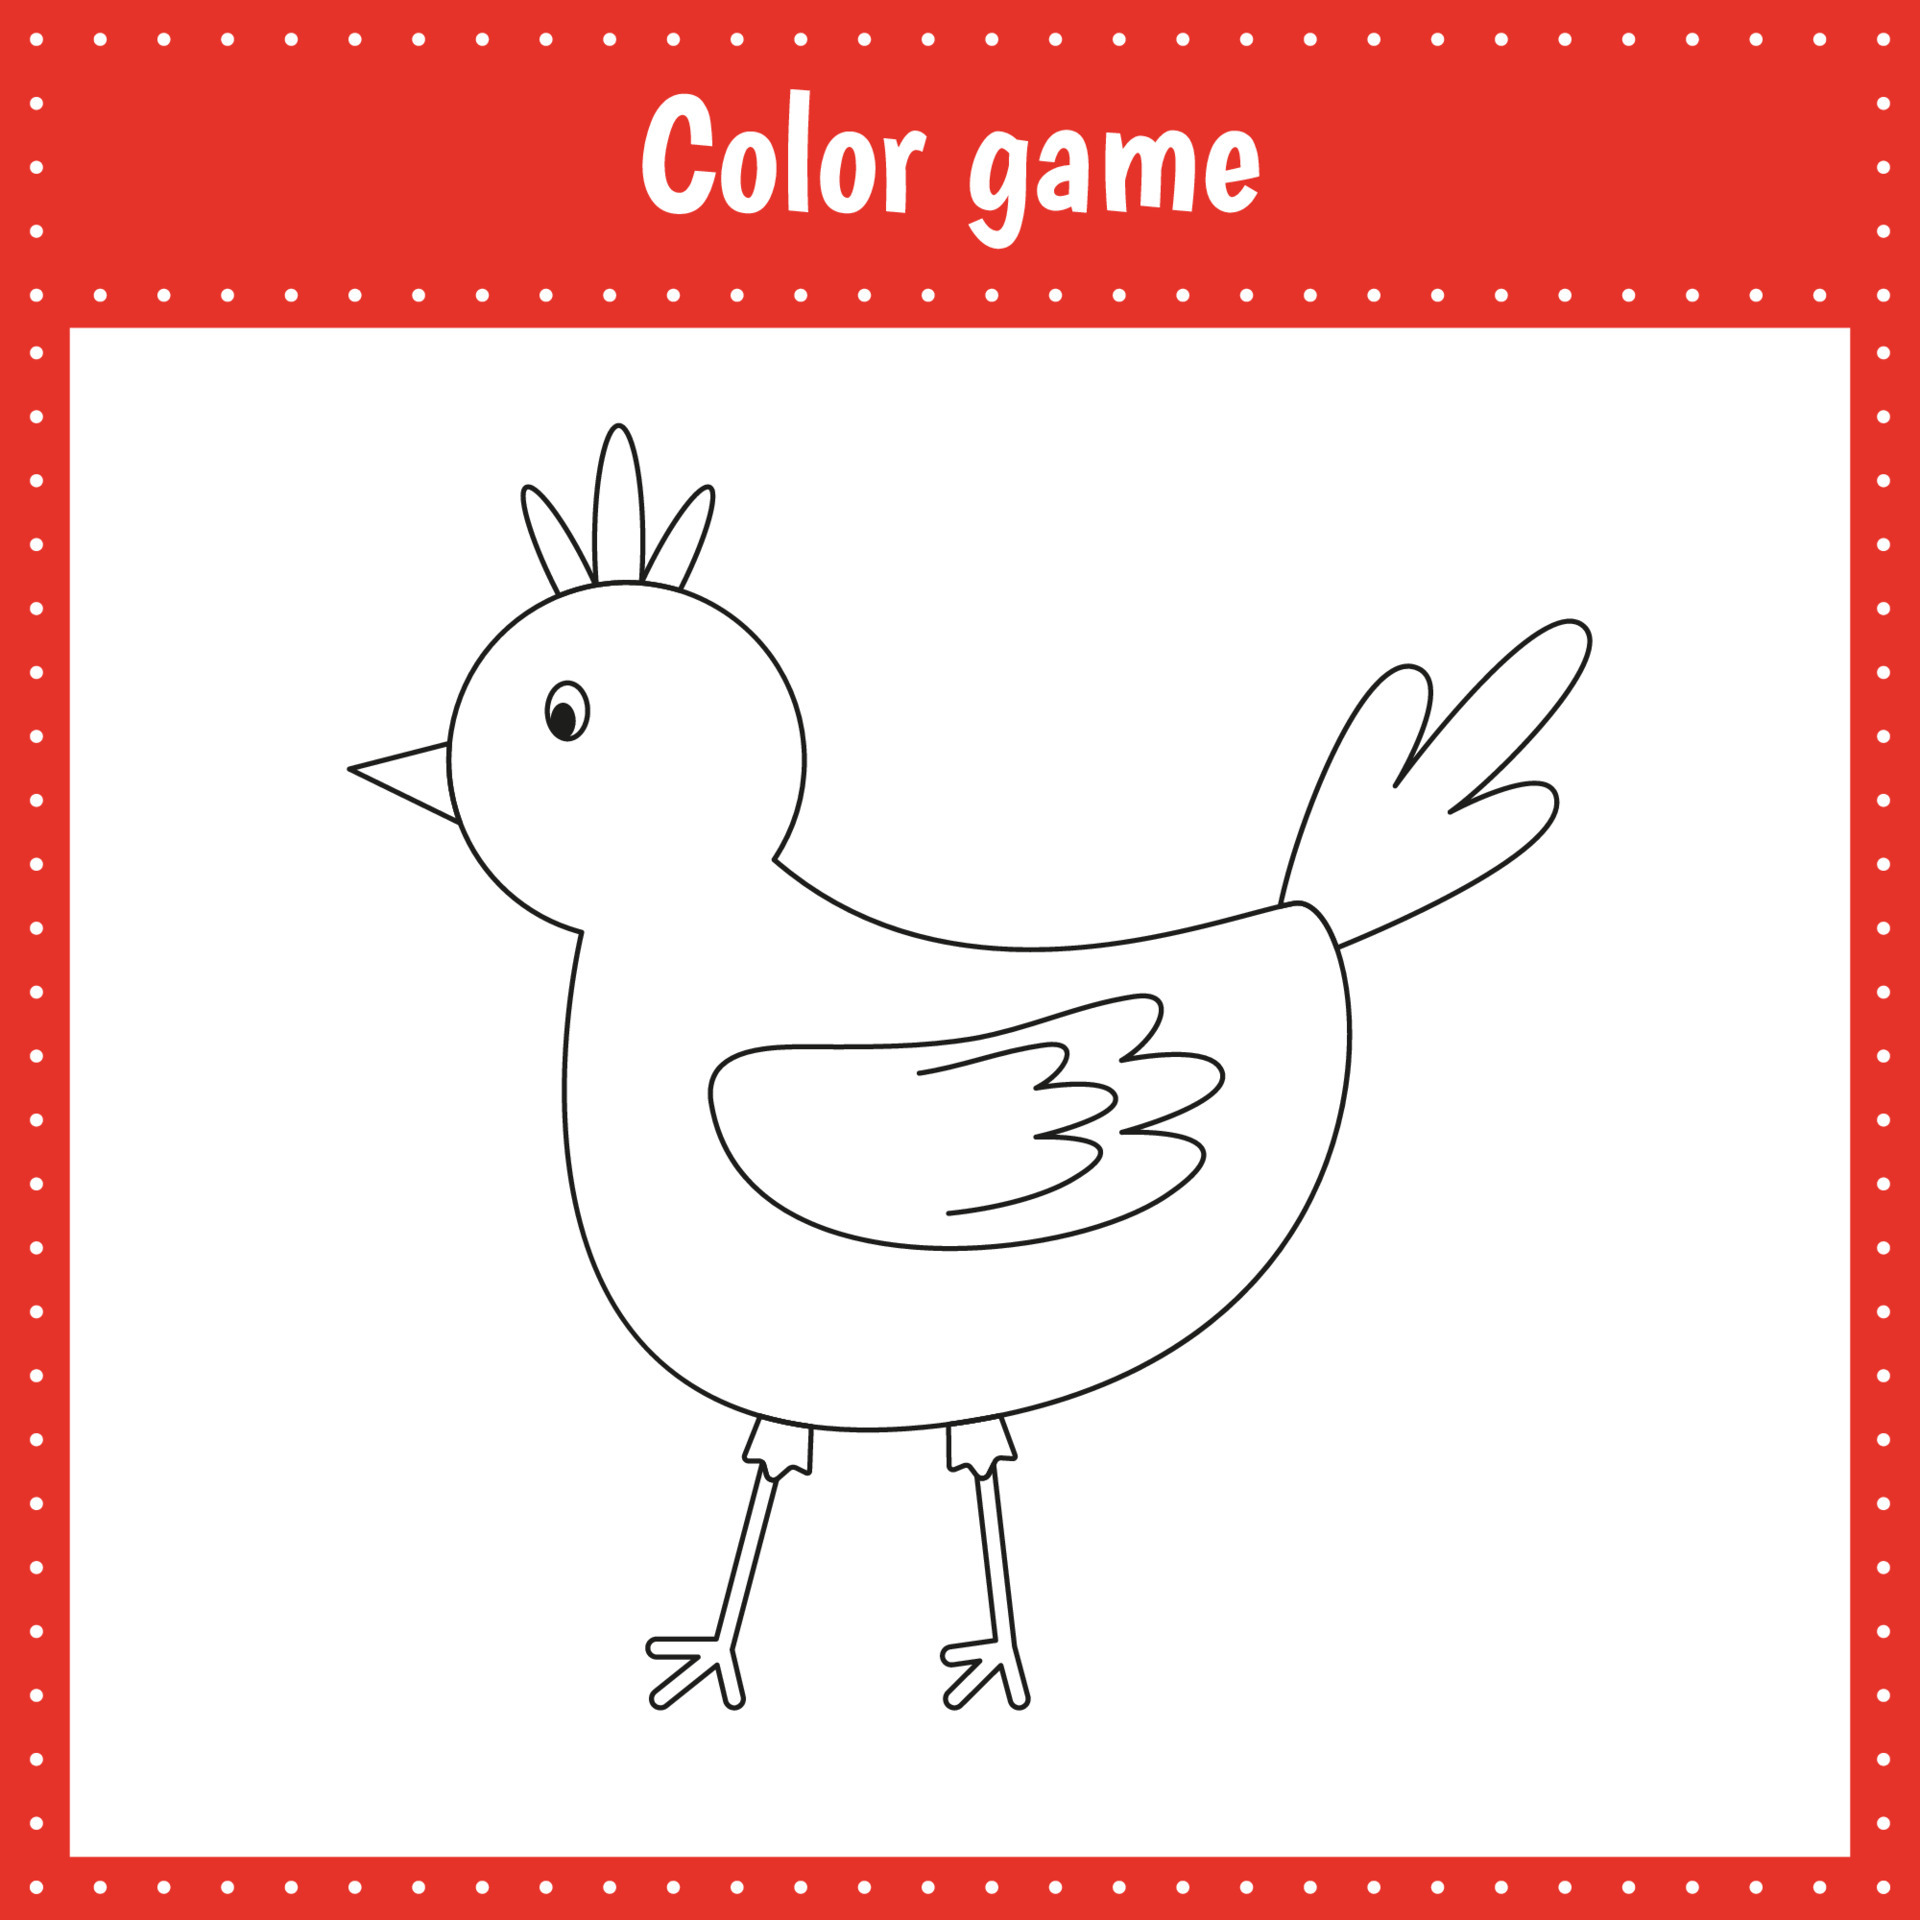 Chicken Coloring Pages - Free Printable Coloring Pages for Kids